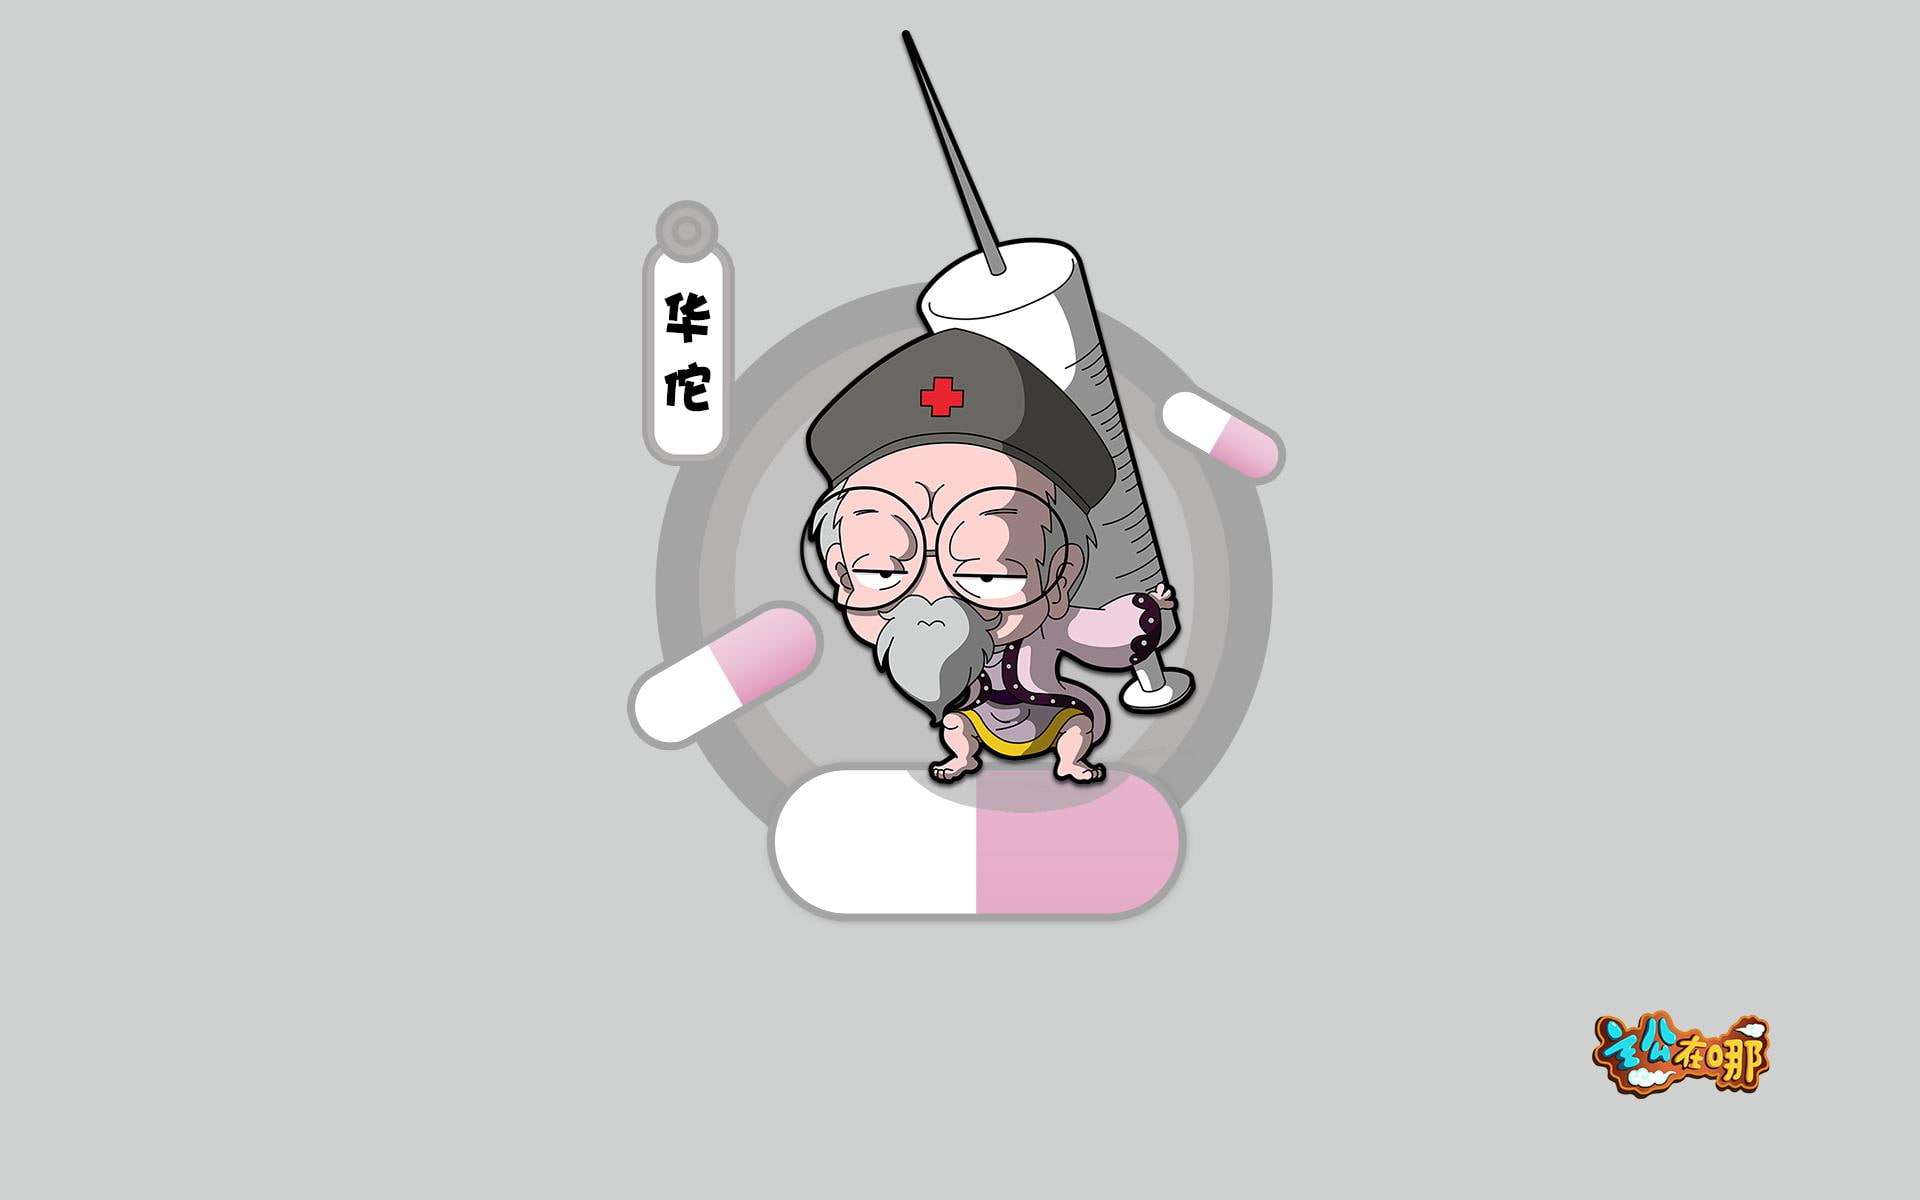 Zhan Wang, King of Battle, Q version of the cartoon, Where lord, Hua, Syringes, Pills, man with round eyeglasses and cap holding syringe graphic